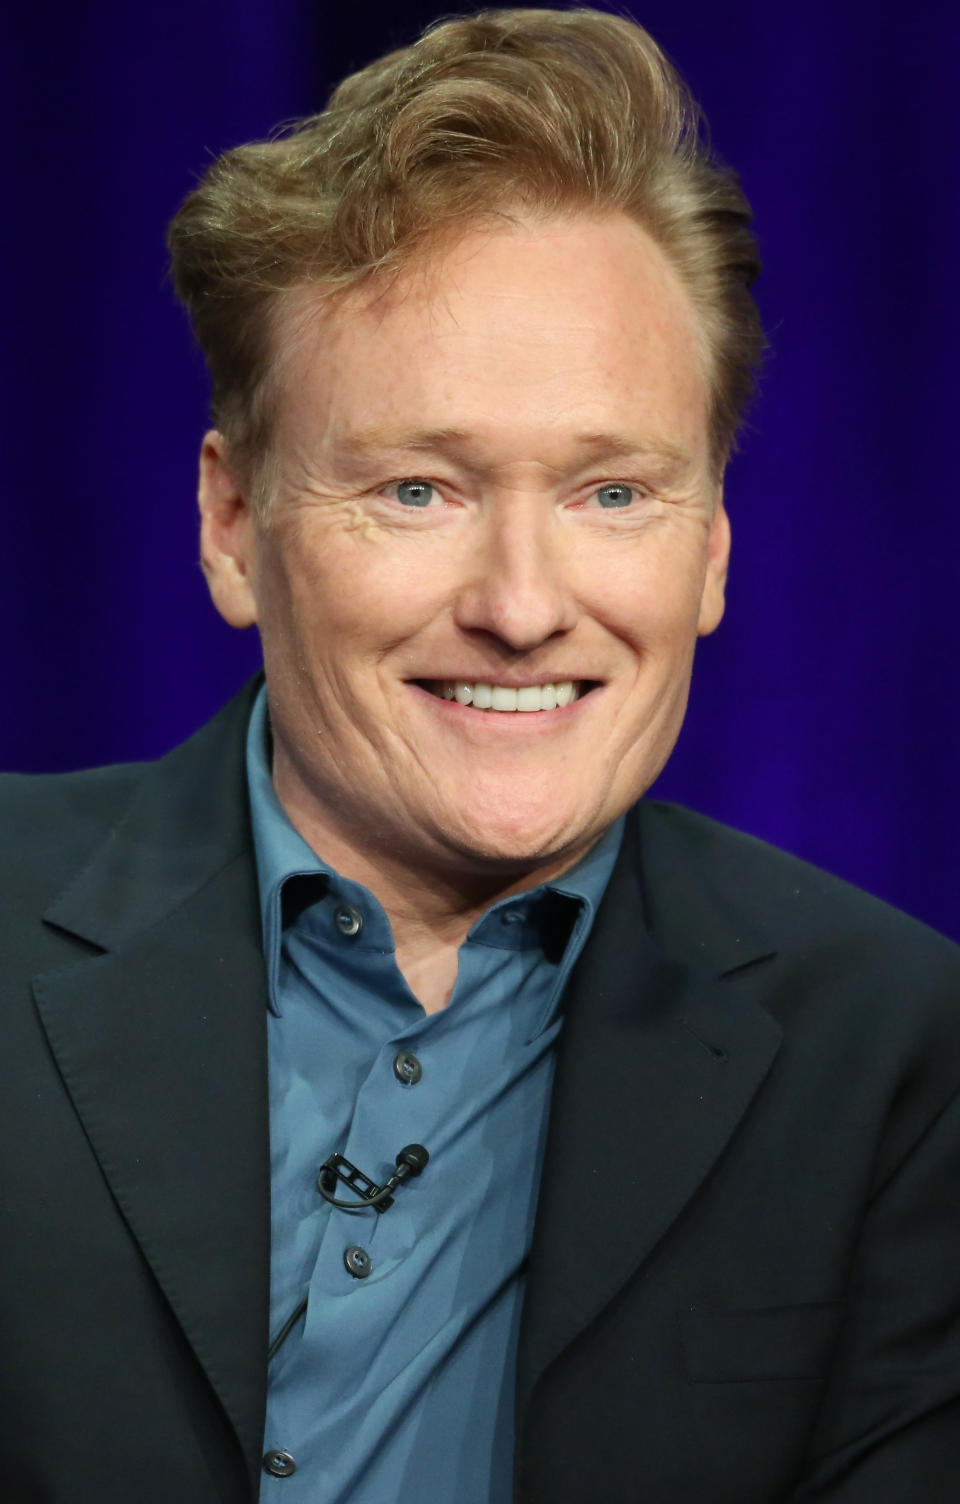 <a href="http://www.pinkisthenewblog.com/2010-11-05/conan-obrien-talks-to-playboy-magazine" target="_blank">“I’ve tried pot, but it doesn’t do much for me.”</a>